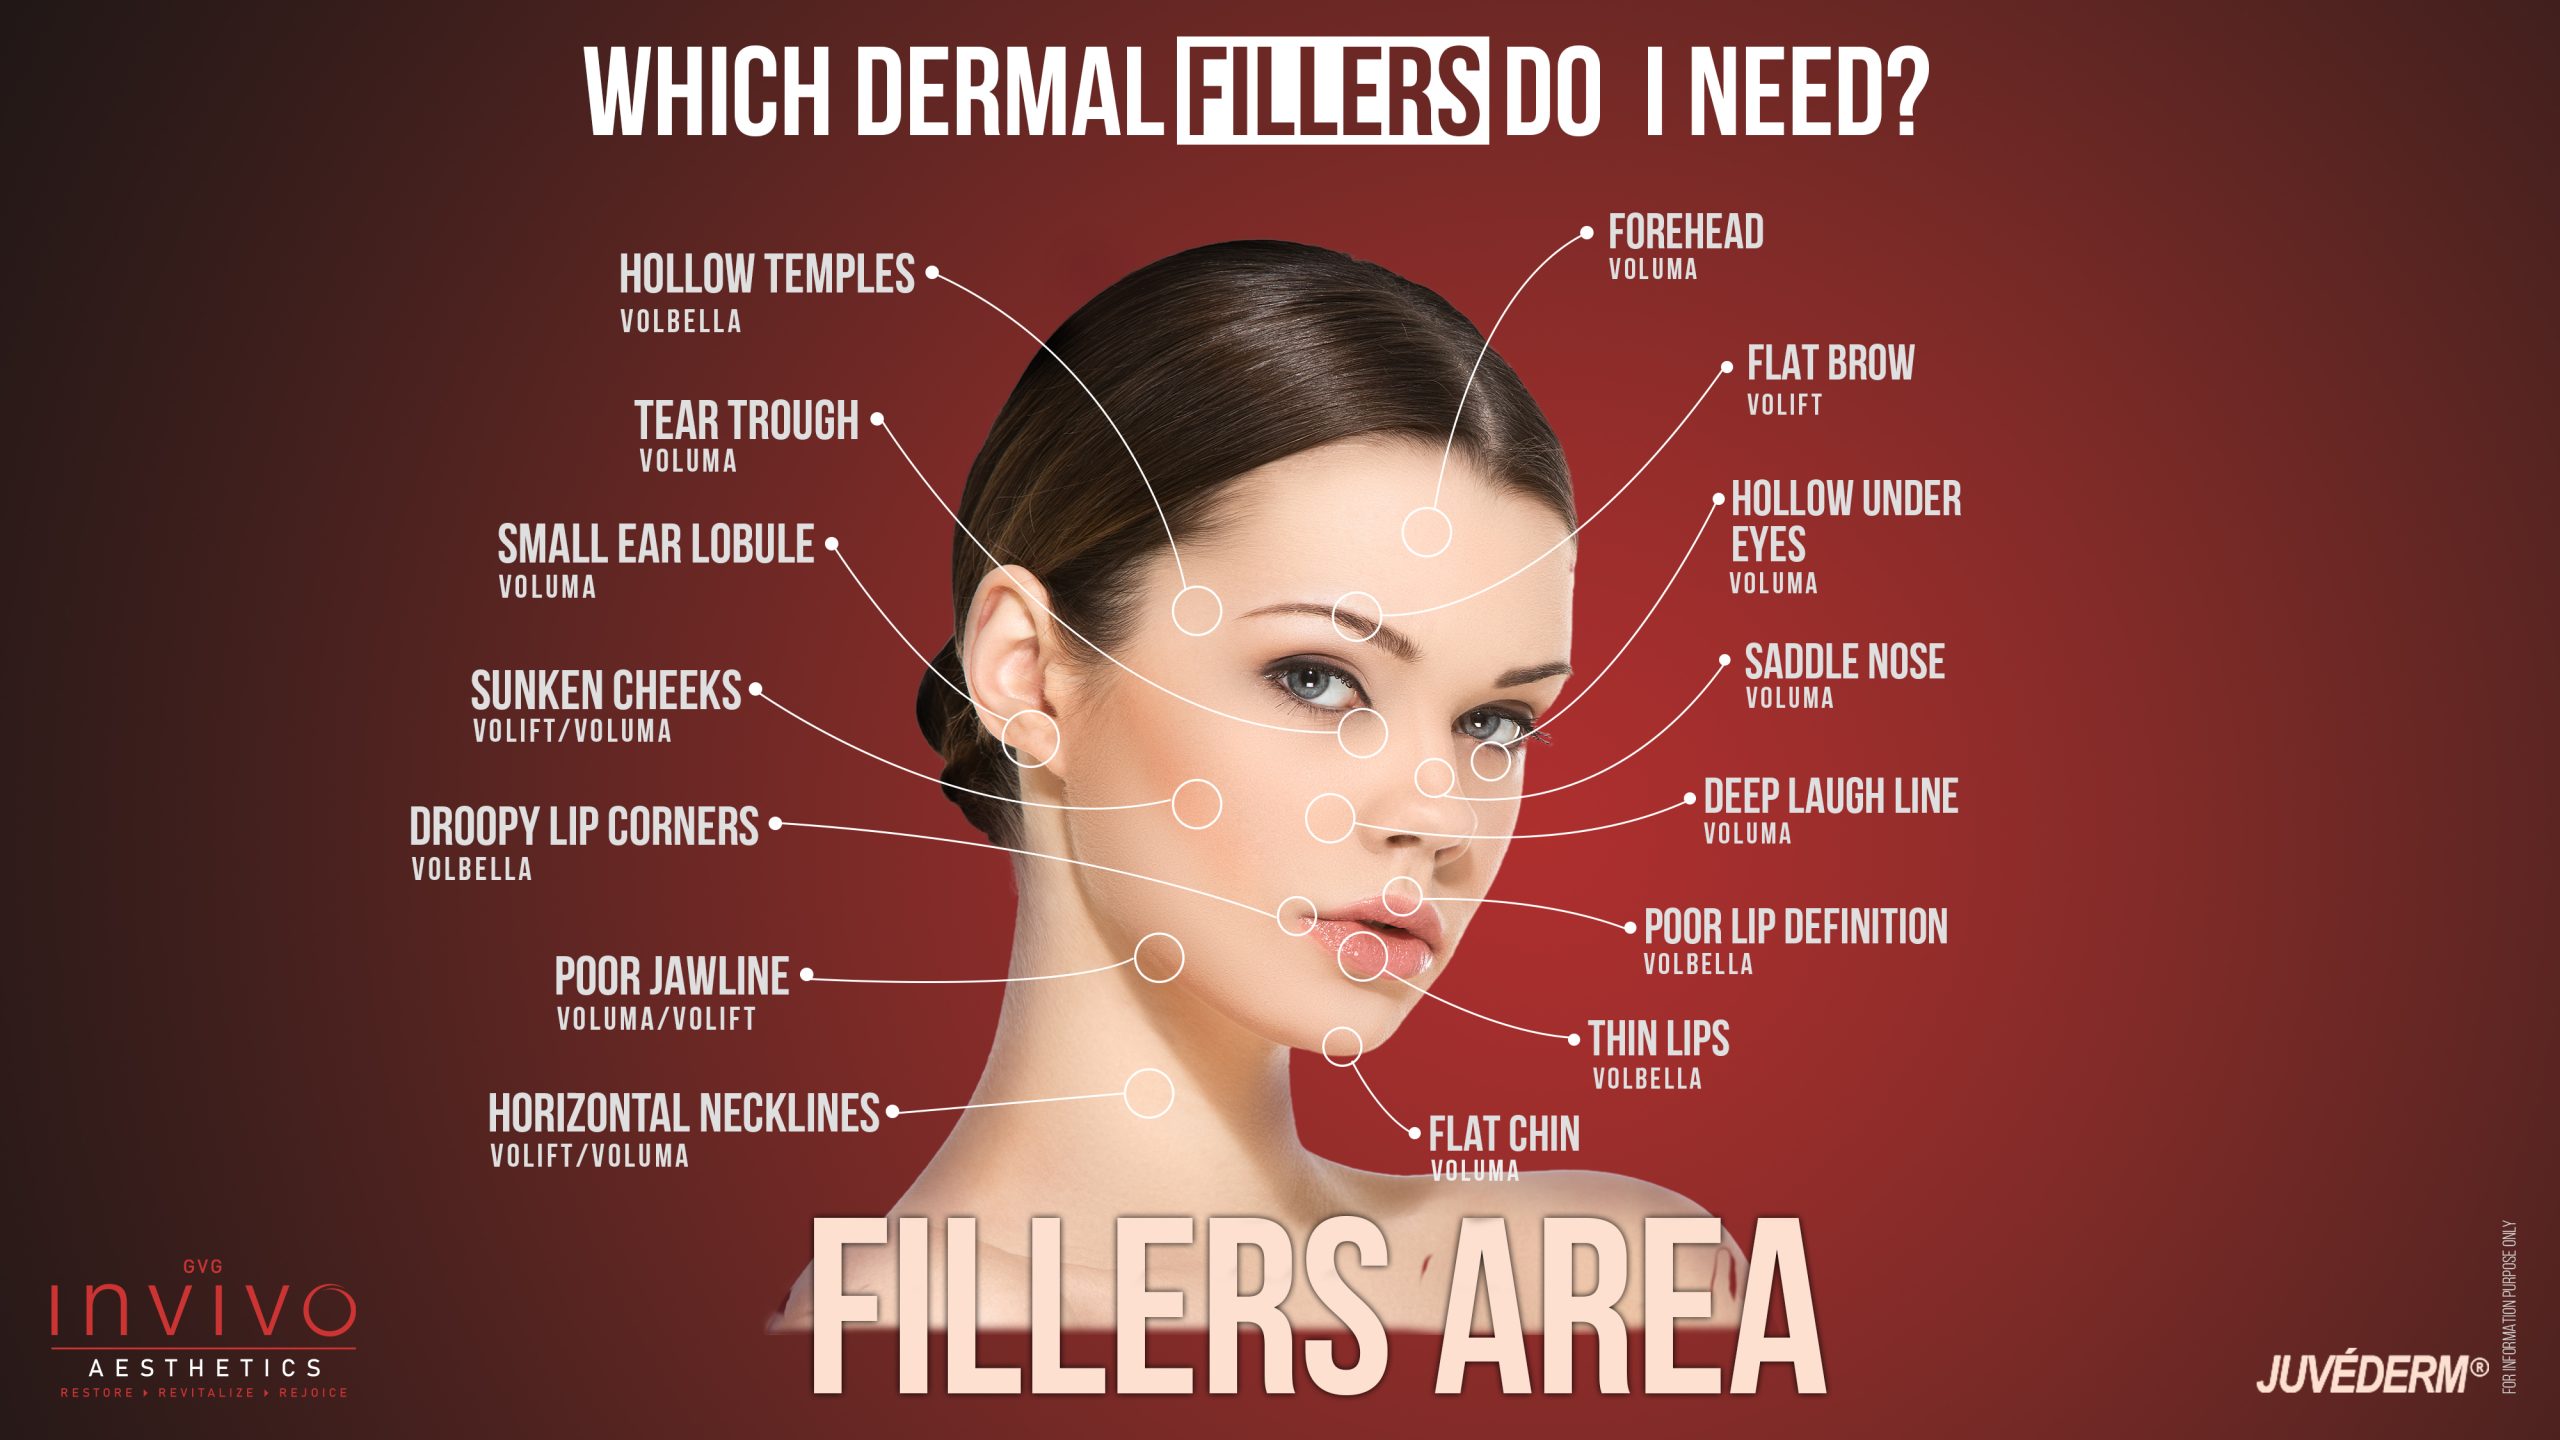 which dermal fillers do i need | GVG Invivo Aesthetics